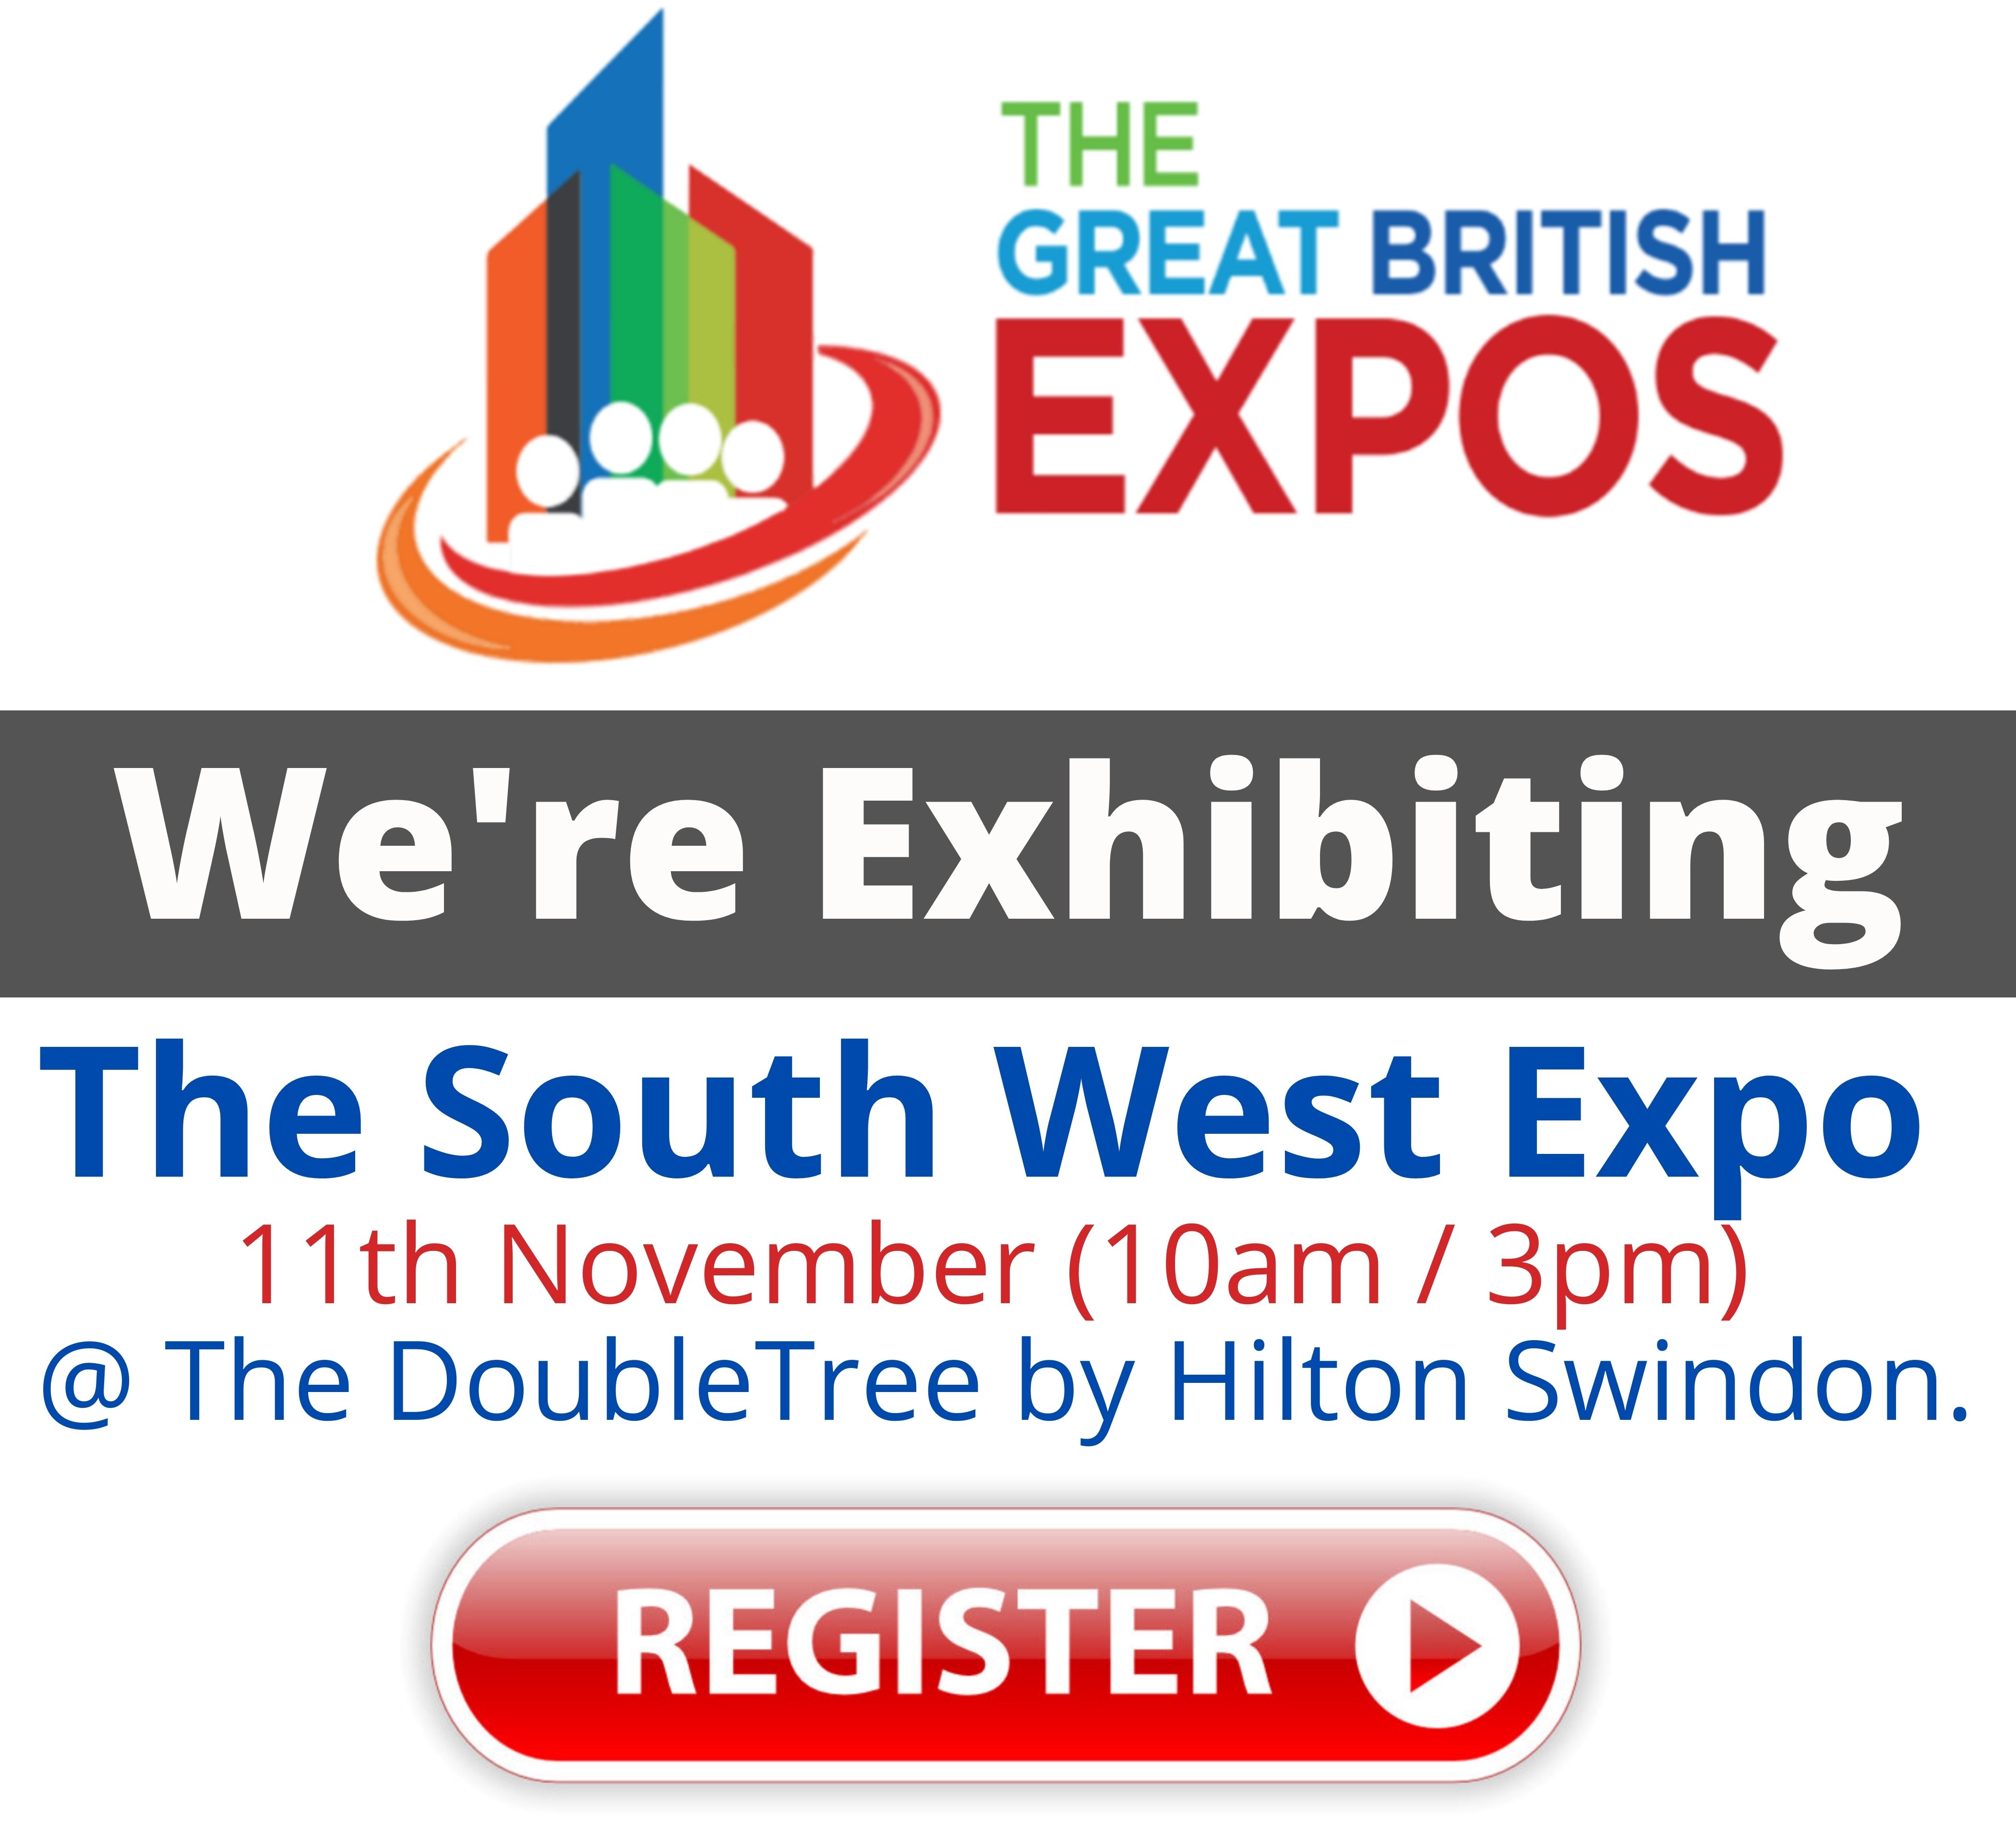 SOUTH WEST EXPO RETURNS TO SWINDON!